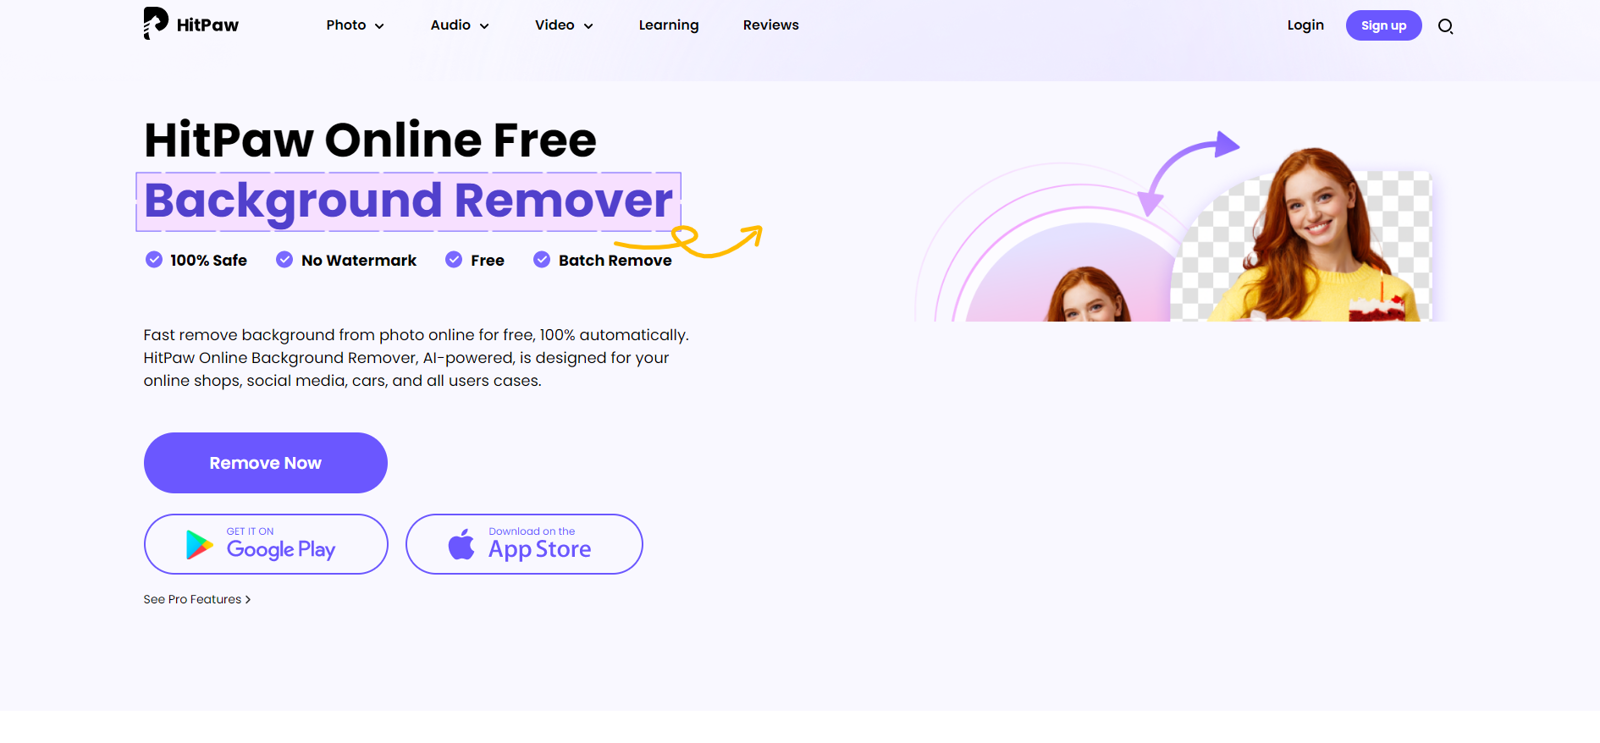 Background remover by Hitpaw website